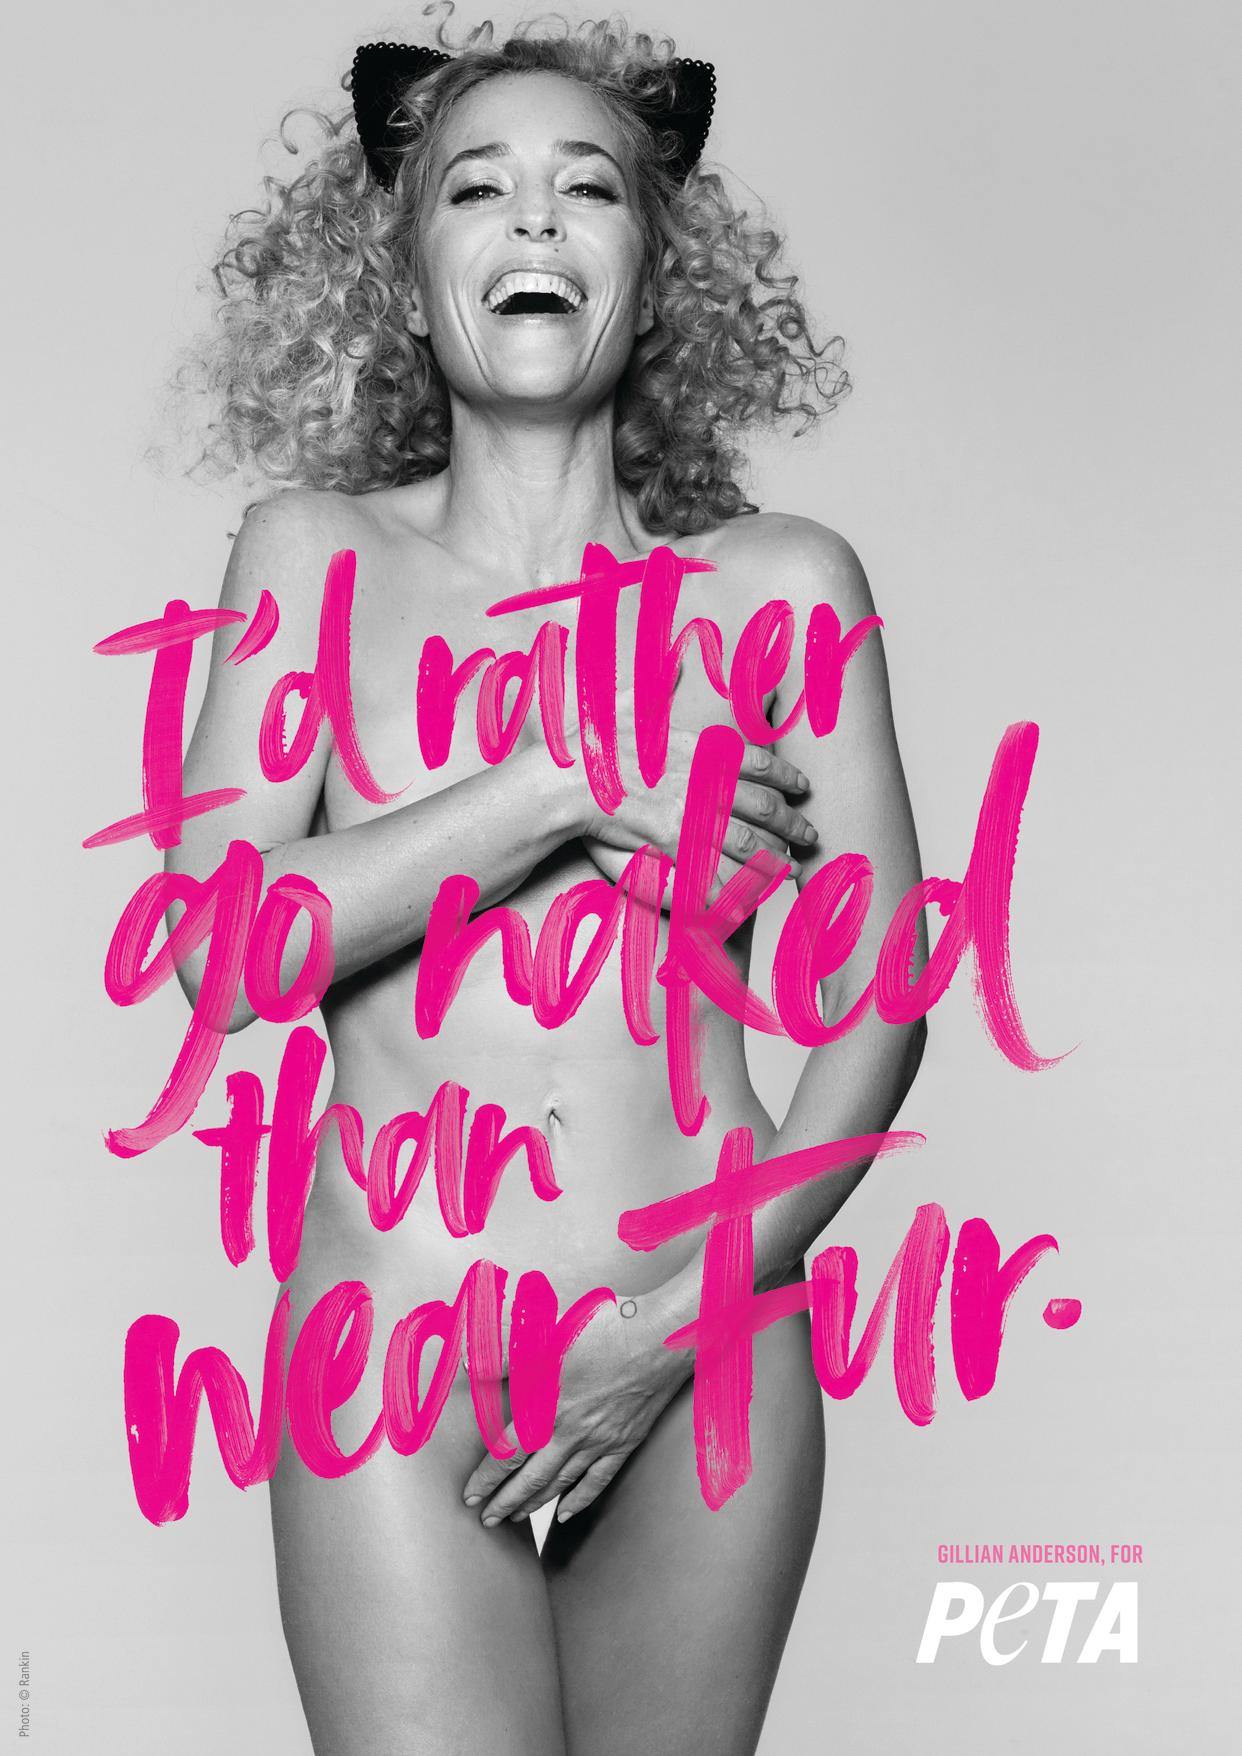 Gillian Anderson poses nude for PETA in an ad that will appear on a 70-foot billboard in NYC’s Penn Plaza. (Photo: PETA)